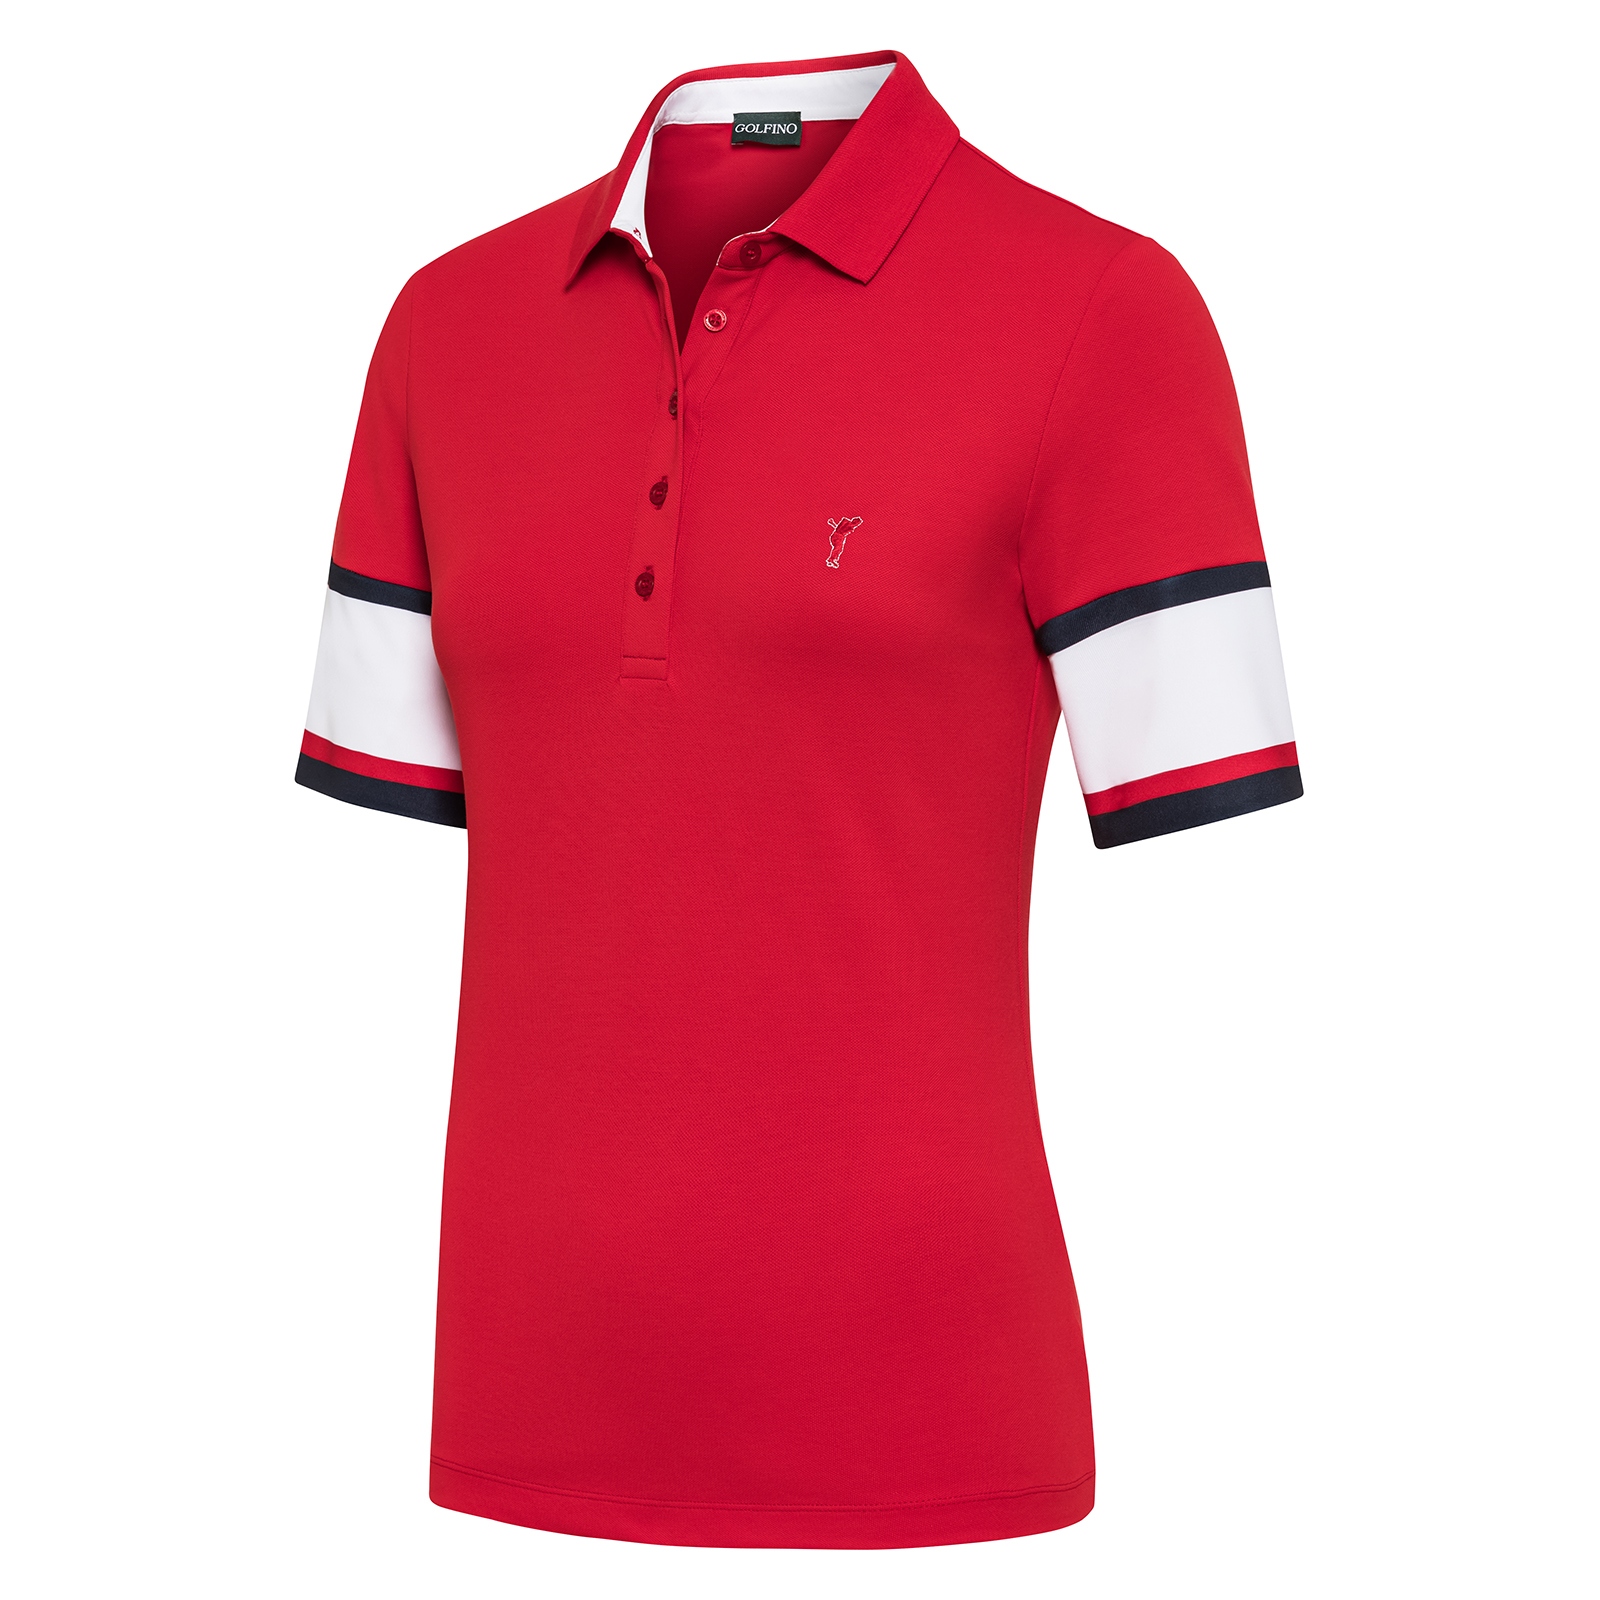 Ladies' short-sleeved polo shirt with ultraviolet protection factor